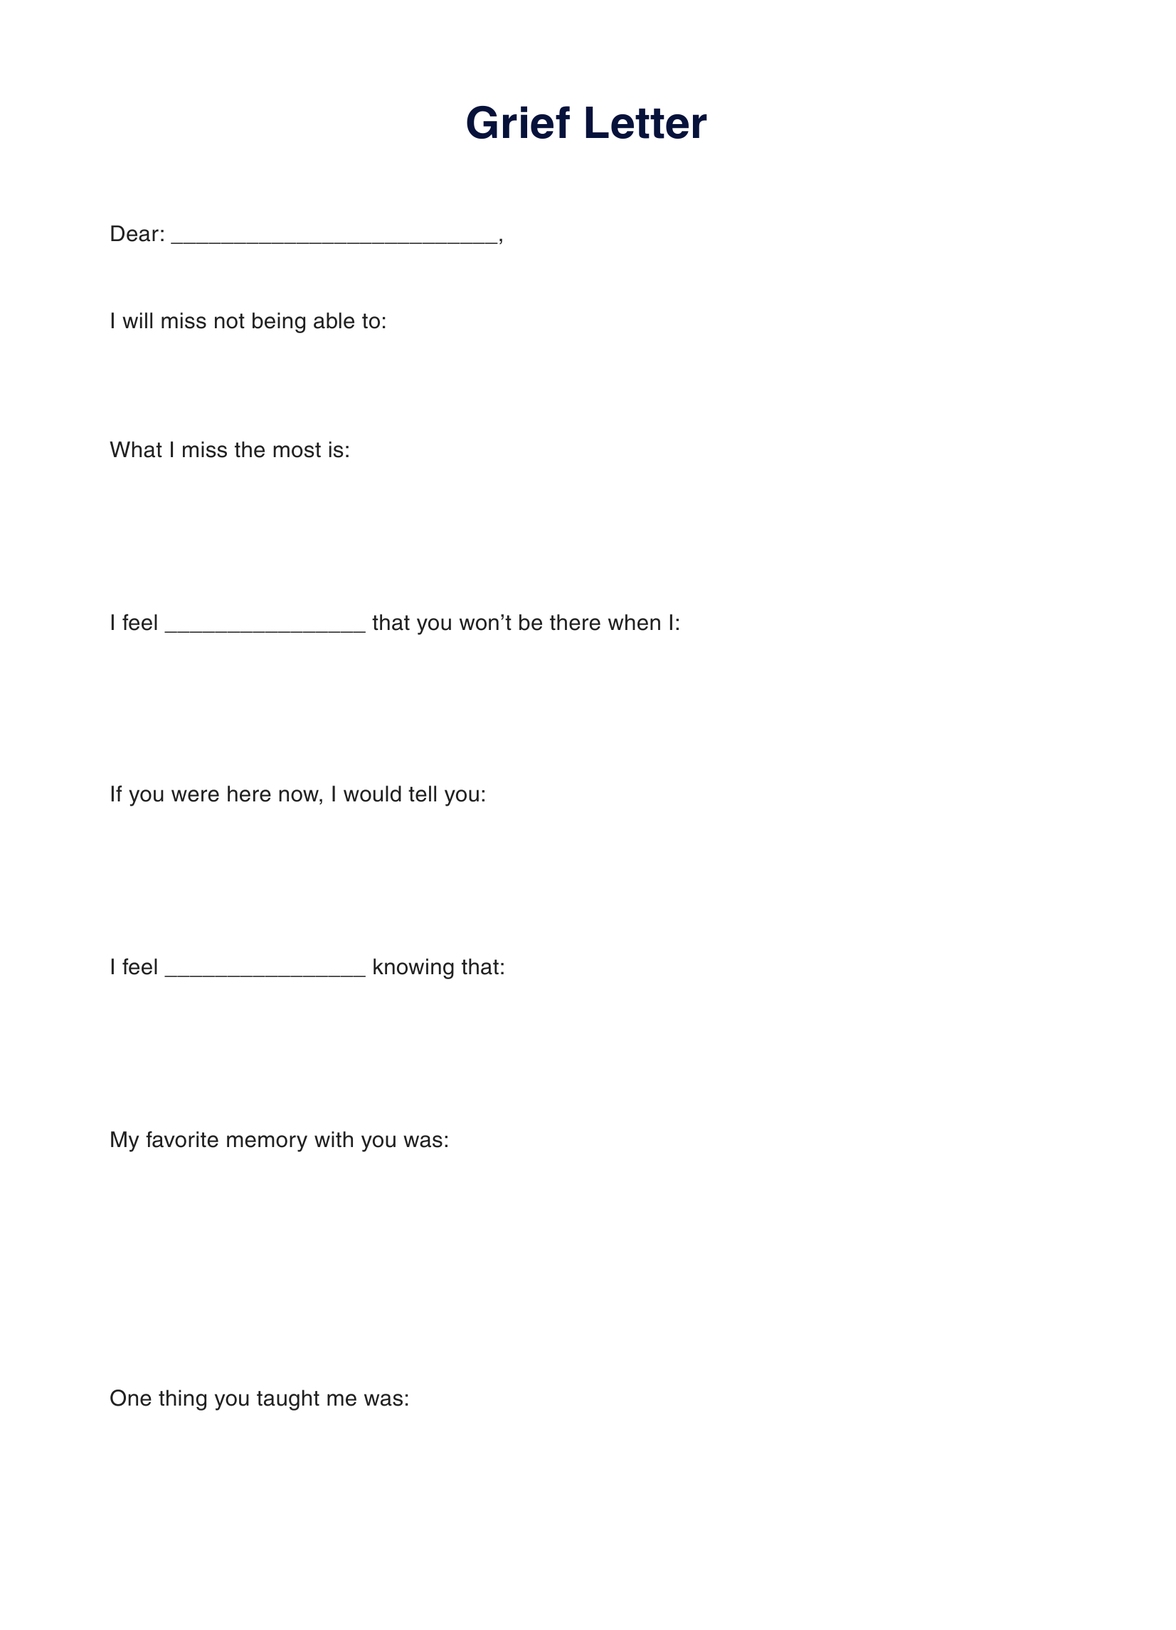 Grief Letter Template PDF Example